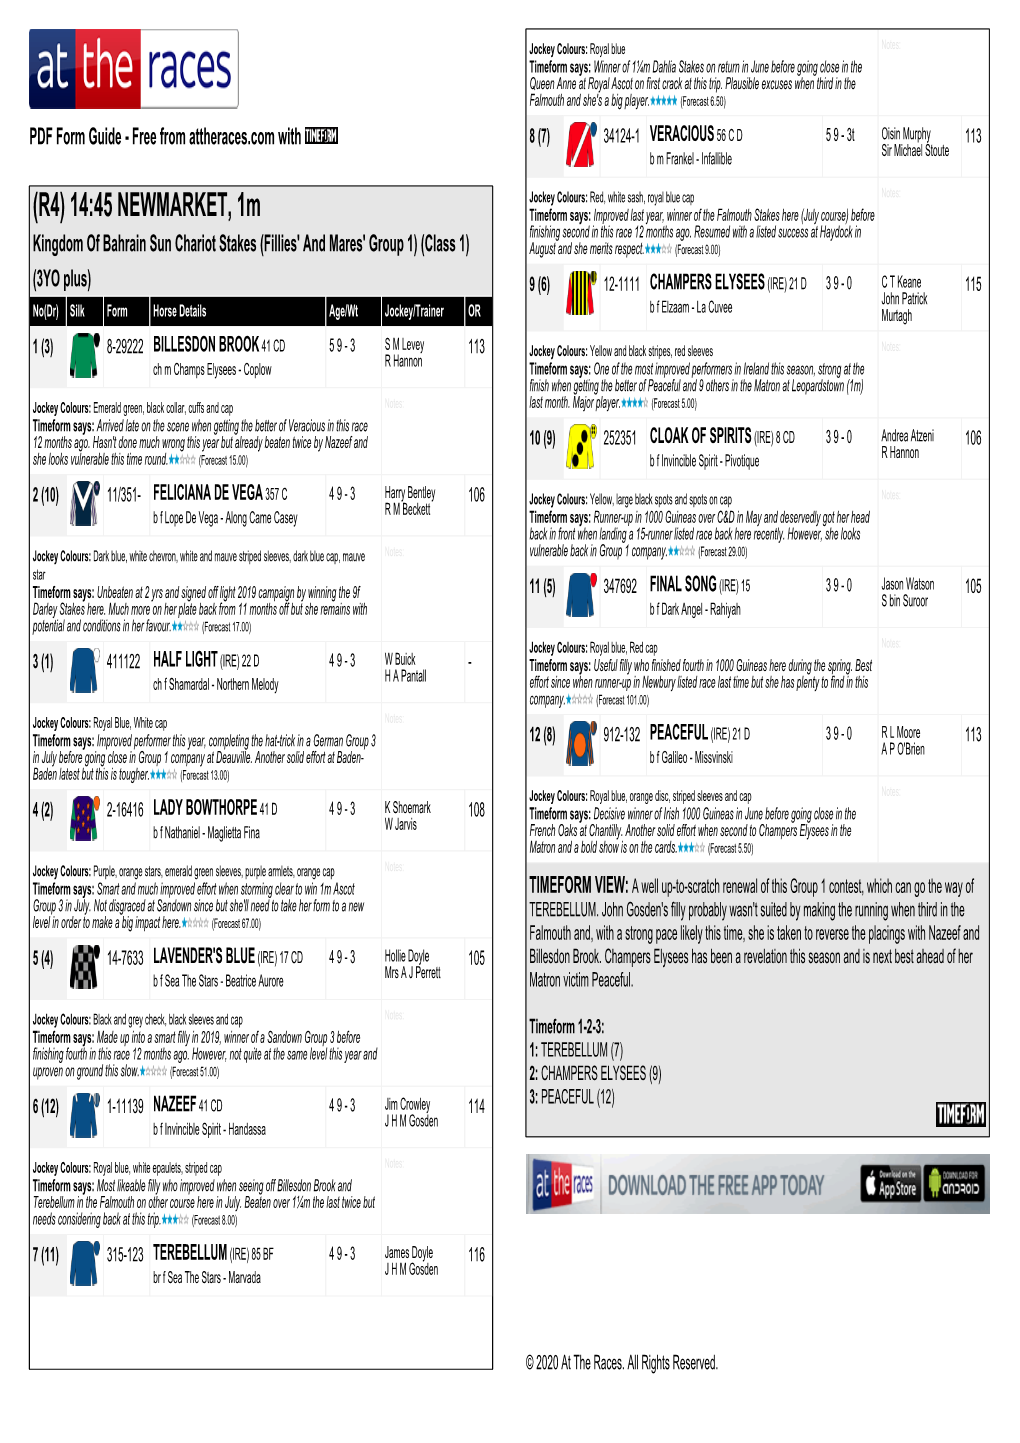 (R4) 14:45 NEWMARKET, 1M Timeform Says: Improved Last Year, Winner of the Falmouth Stakes Here (July Course) Before Finishing Second in This Race 12 Months Ago